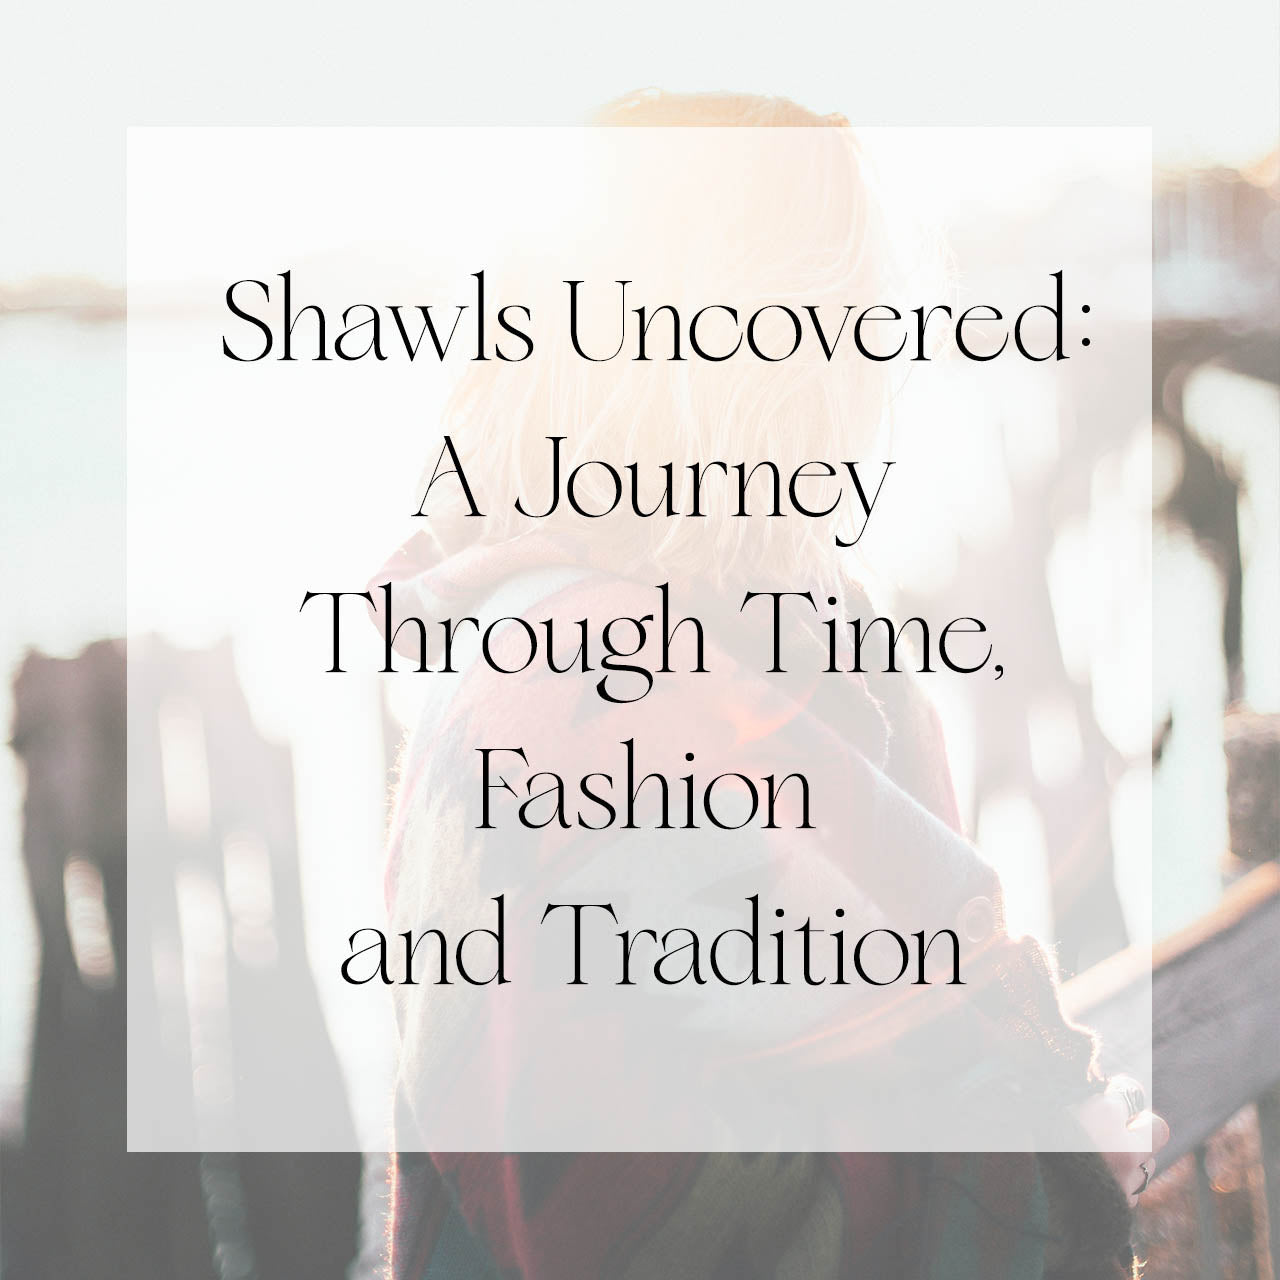 Shawls Uncovered: A Journey Through Time, Fashion and Tradition